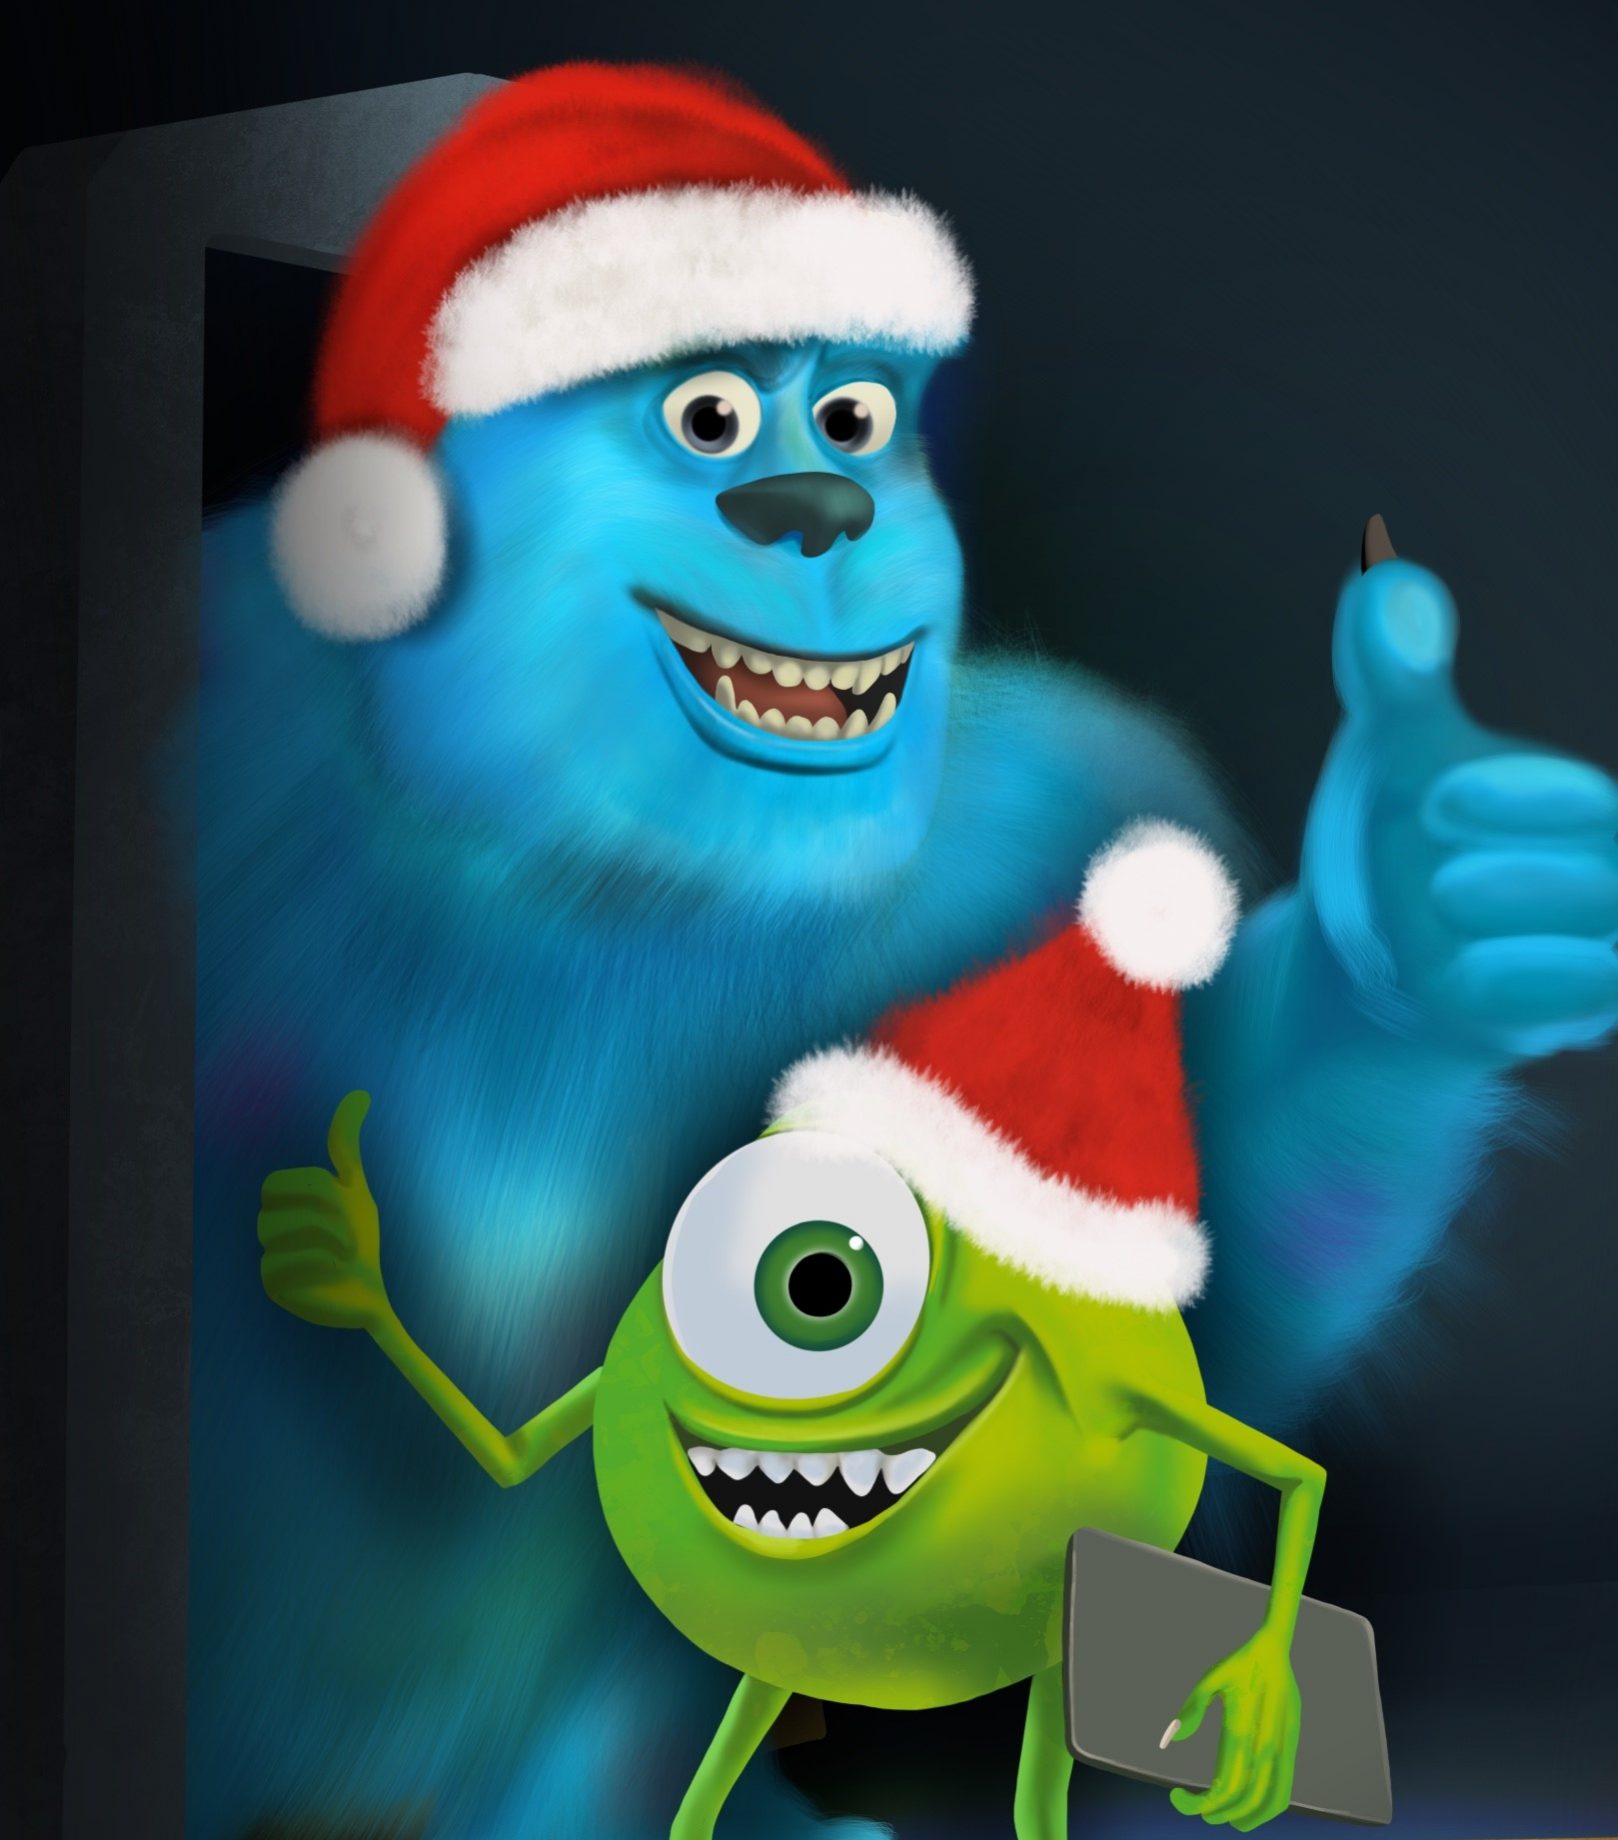 Learn how to draw Sullivan & Mike from Disney Pixar animated film Monsters Inc - tutorial using procreate app